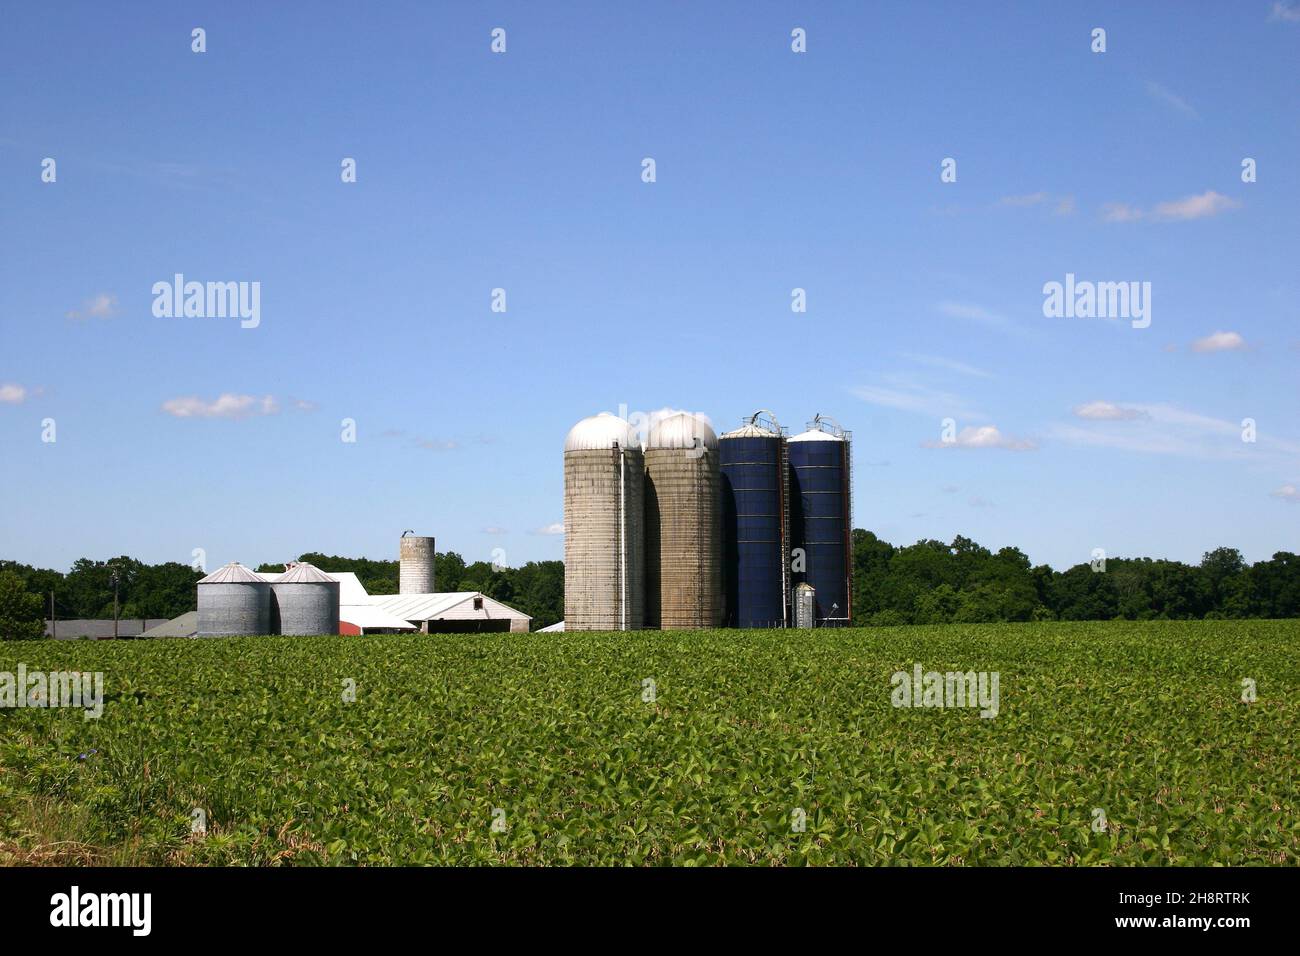 Vegetable/grain farm in rural New Jersey, USA . Outbuildings and silos at the end of the fields. New Jersey is also known as The Garden State. Stock Photo